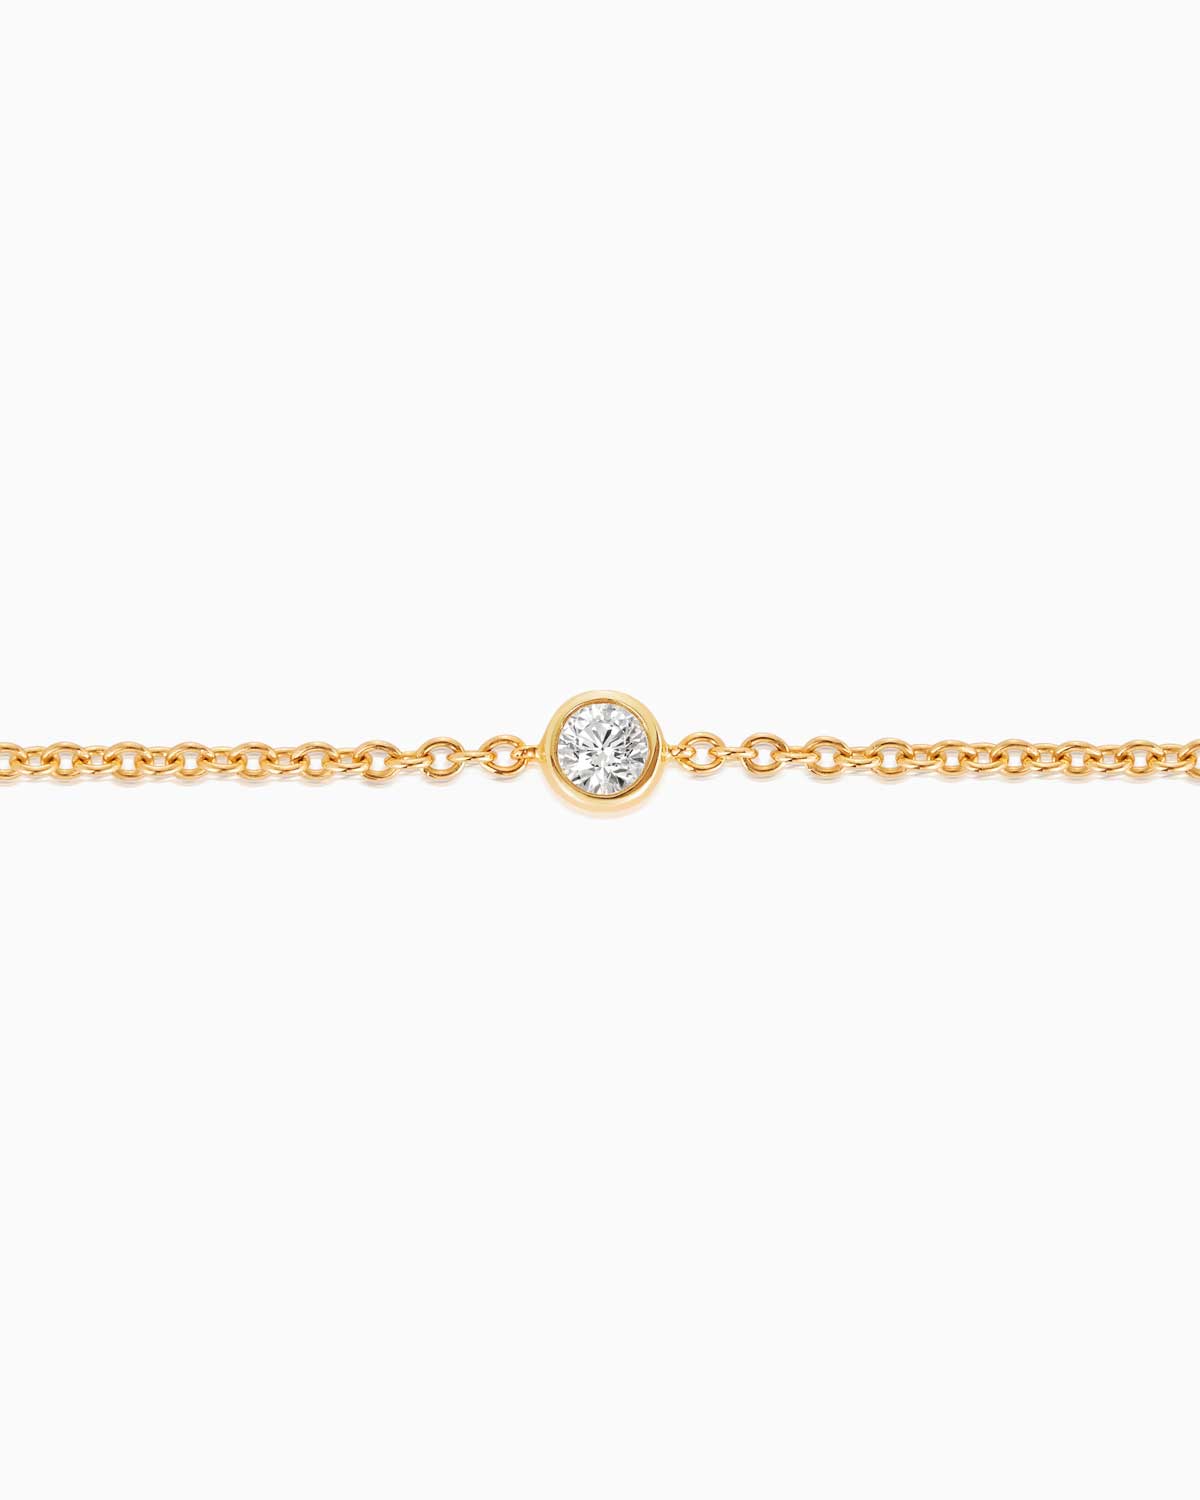 Close up view of Petit single stone diamond bracelet featuring 18 karat yellow gold by claude and me jewellery.